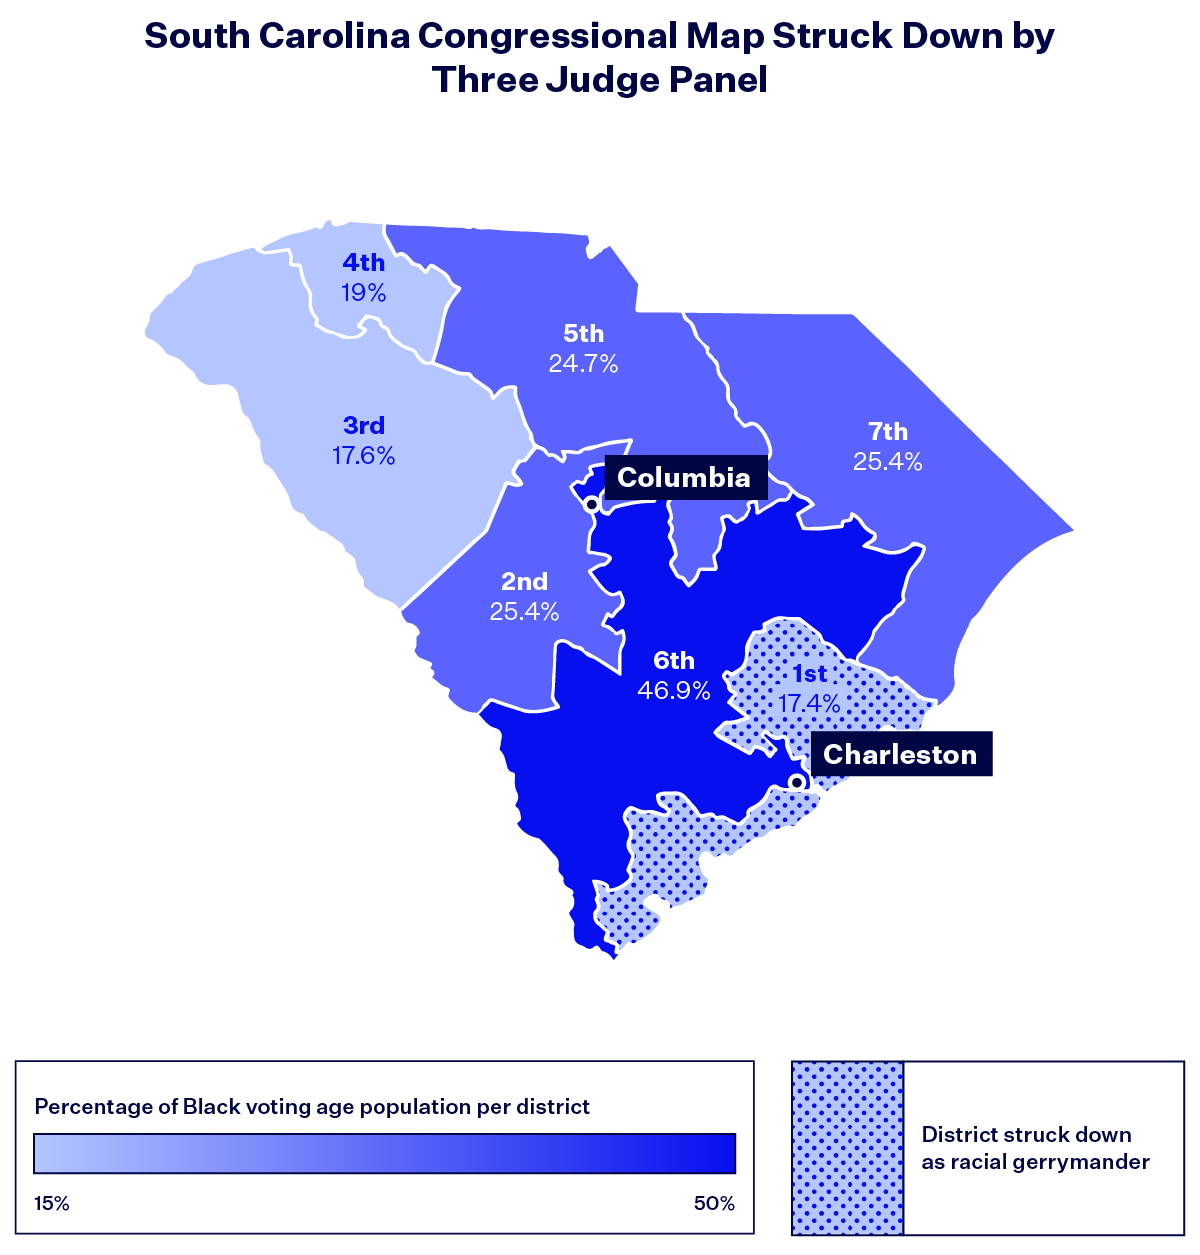 Graphic titled "South Carolina Congressional Map Struck Down by Three Judge Panel" showing a blue-tinted South Carolina congressional map with a gradient of 15 to 50% percentage of Black voting age population per district. The 1st Congressional district contains polka dots that correspond to the key: District stuck down as  racial gerrymander